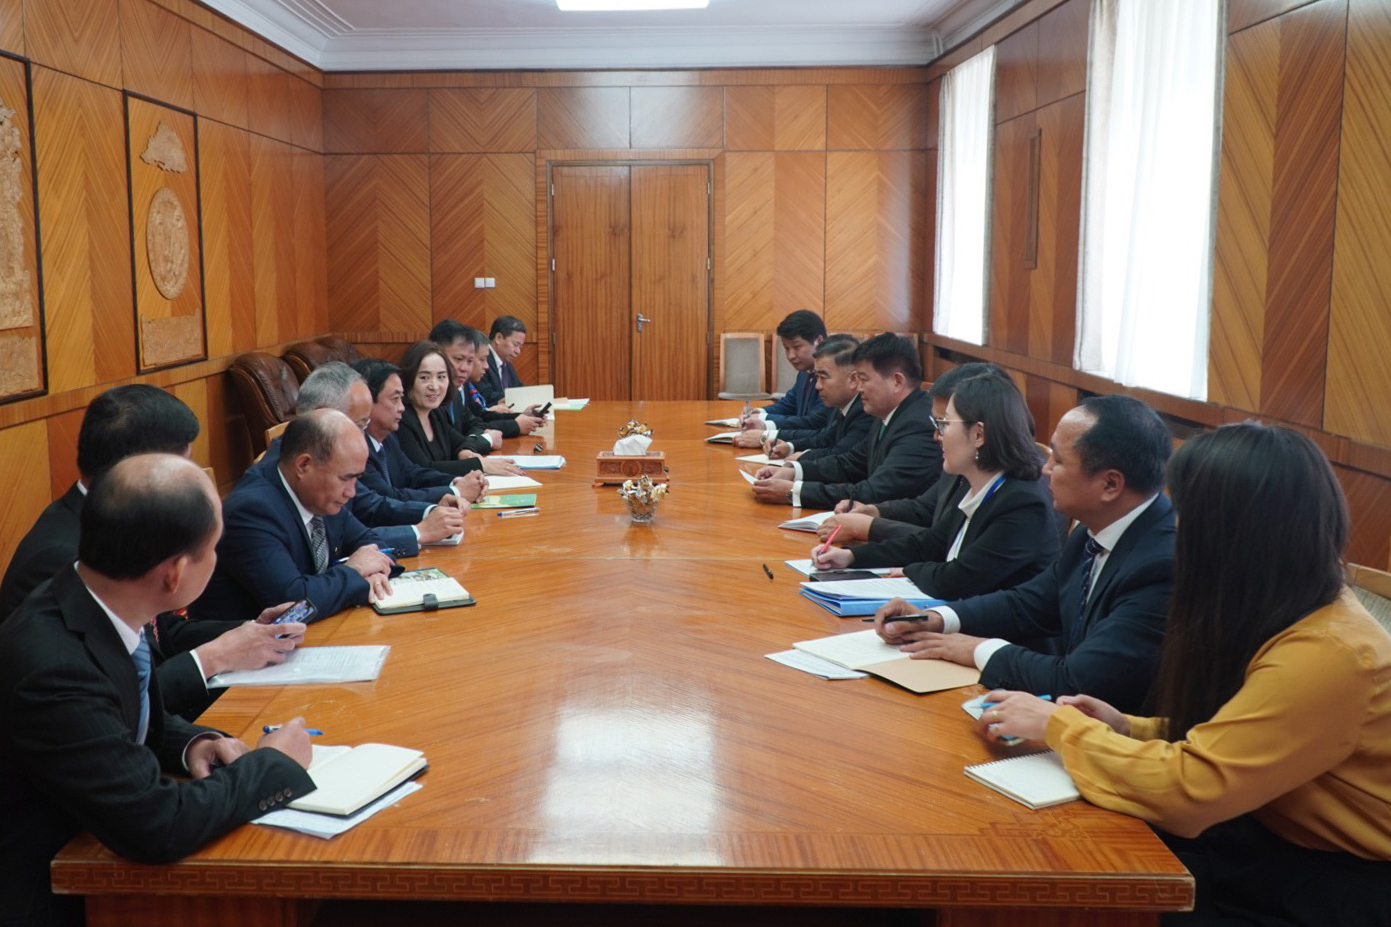 Talks between the Ministry of Agriculture and Rural Development of Vietnam and the Ministry of Food, Agriculture and Light Industry of Mongolia.